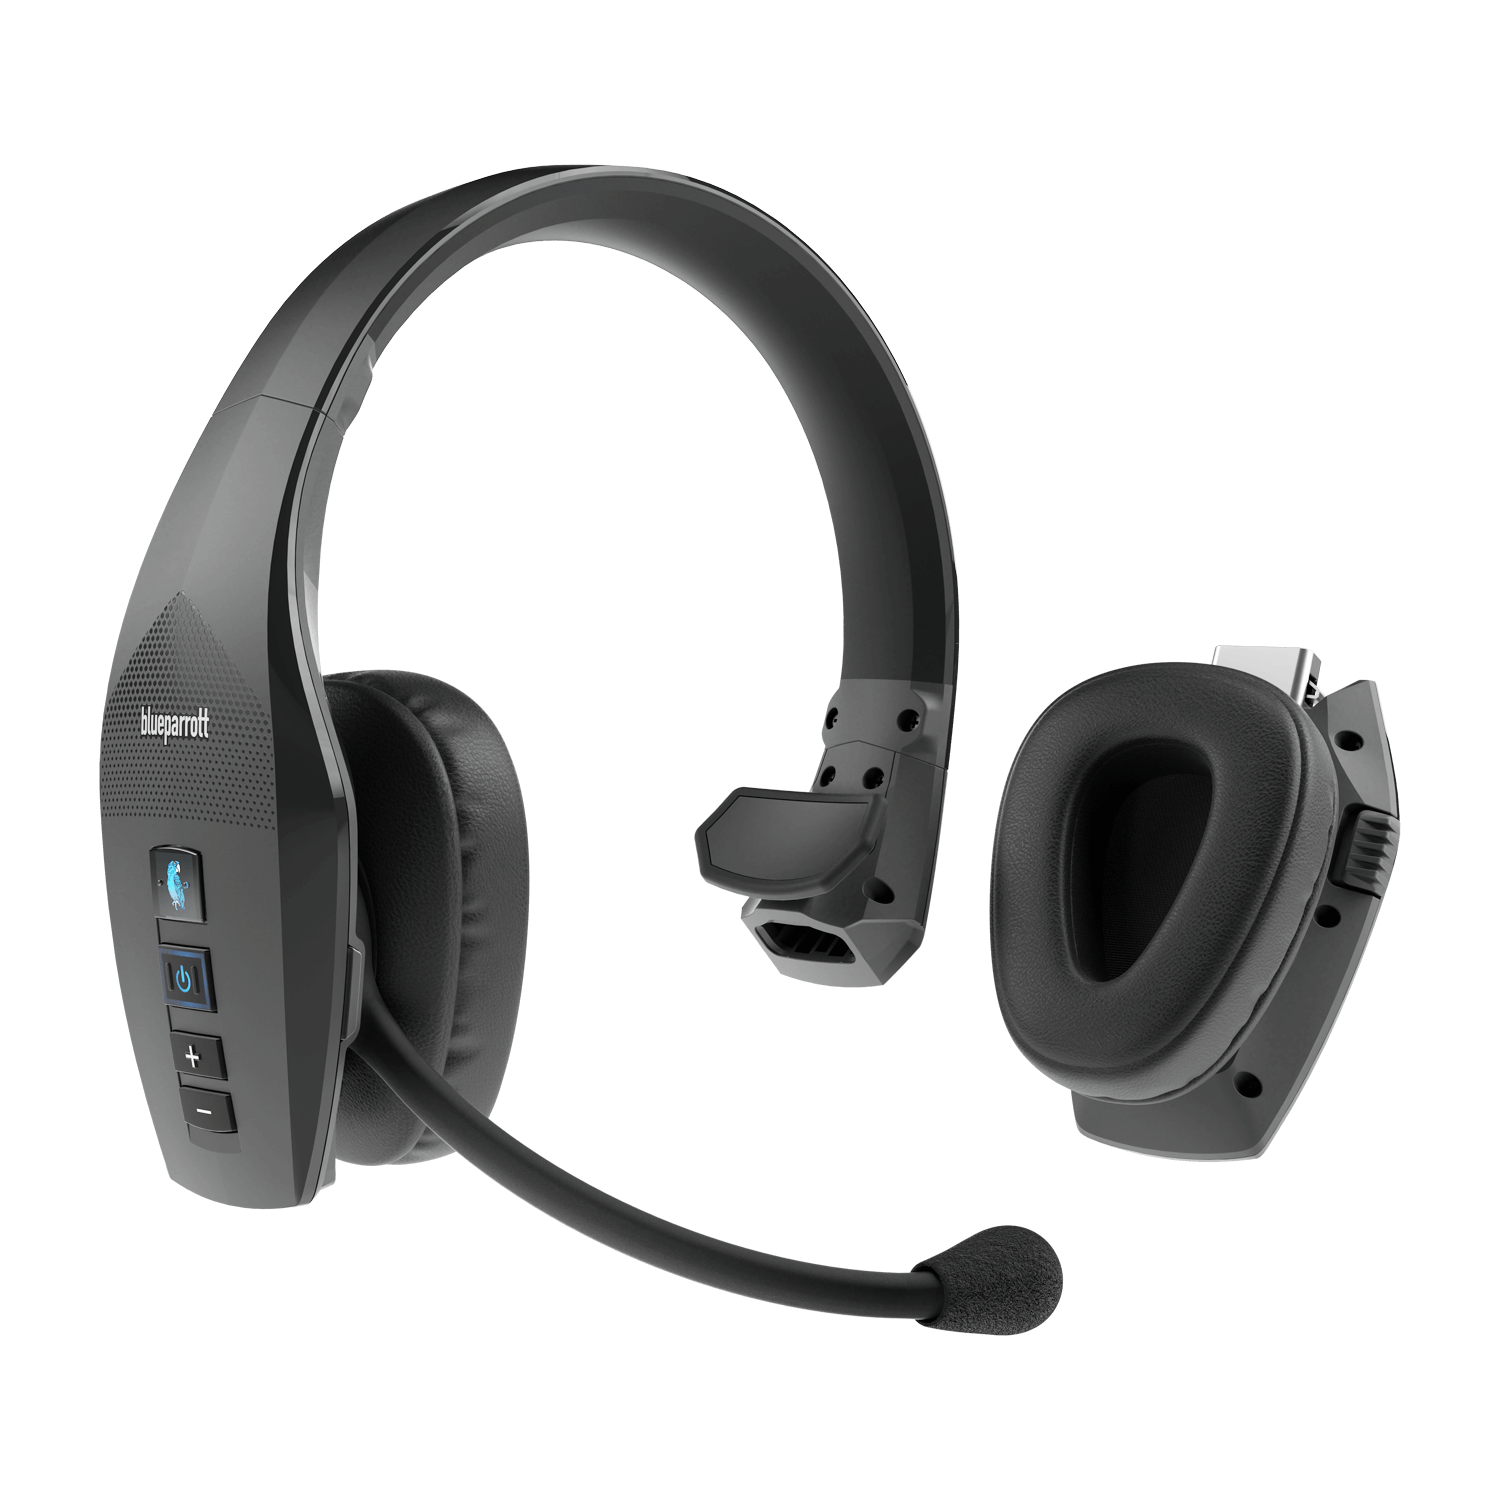 IP54-Rated Protection and Hands-Free Headset with Expanded Wireless Range Renewed BlueParrott B350-XT Noise Cancelling Bluetooth Headset Industry Leading Sound and Comfort 